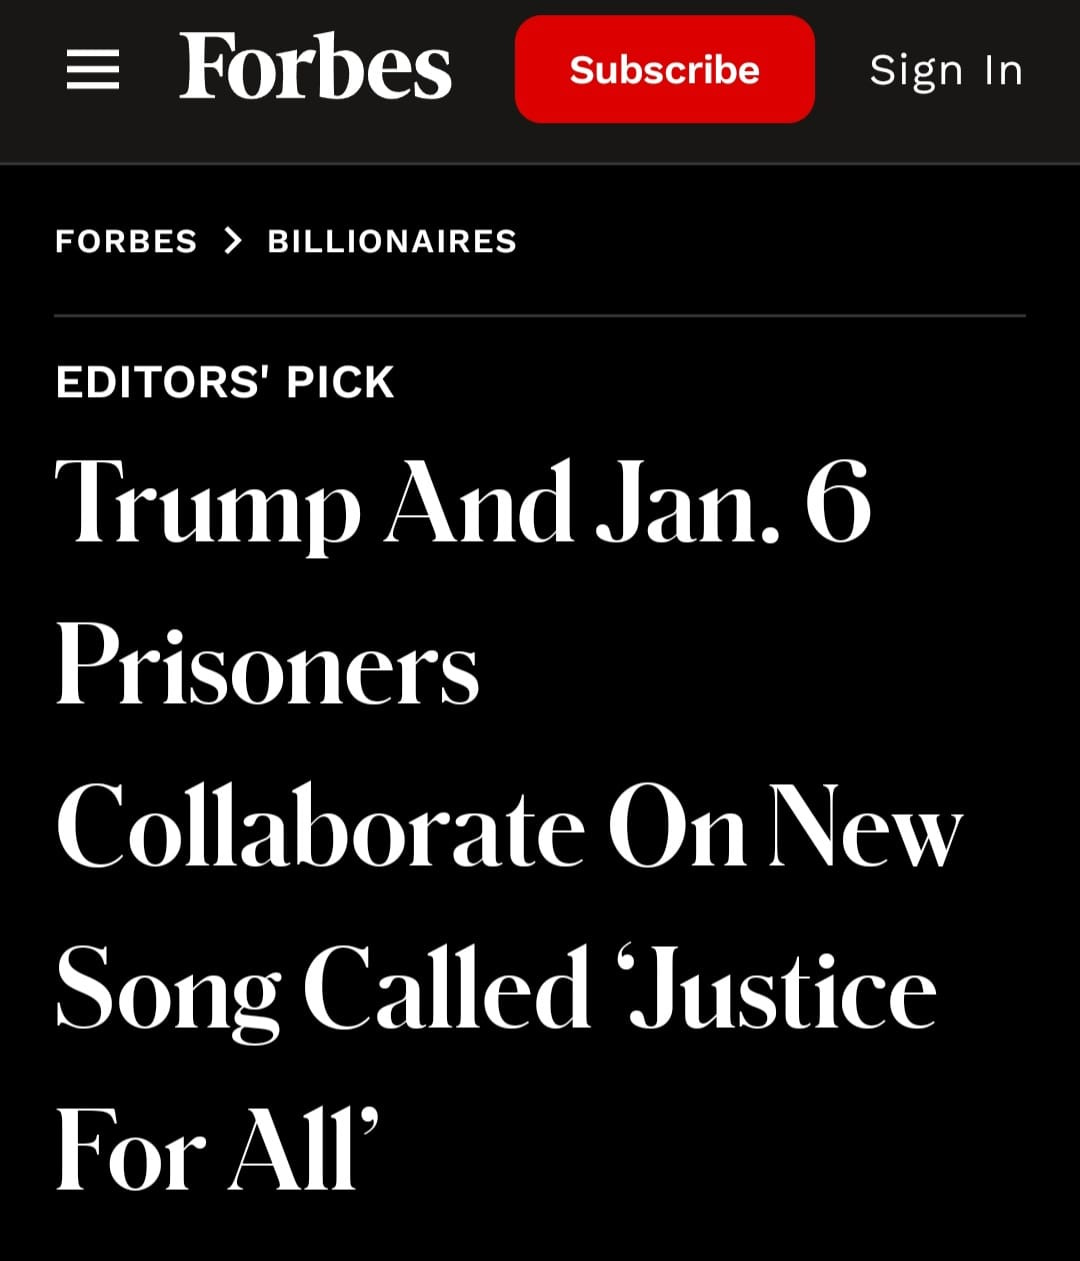 May be an image of text that says '≡ Forbes Subscribe Sign In FORBES BILLIONAIRES EDITORS' PICK Trump And Jan. 6 Prisoners Collaborate On New Song Called Justice For All''